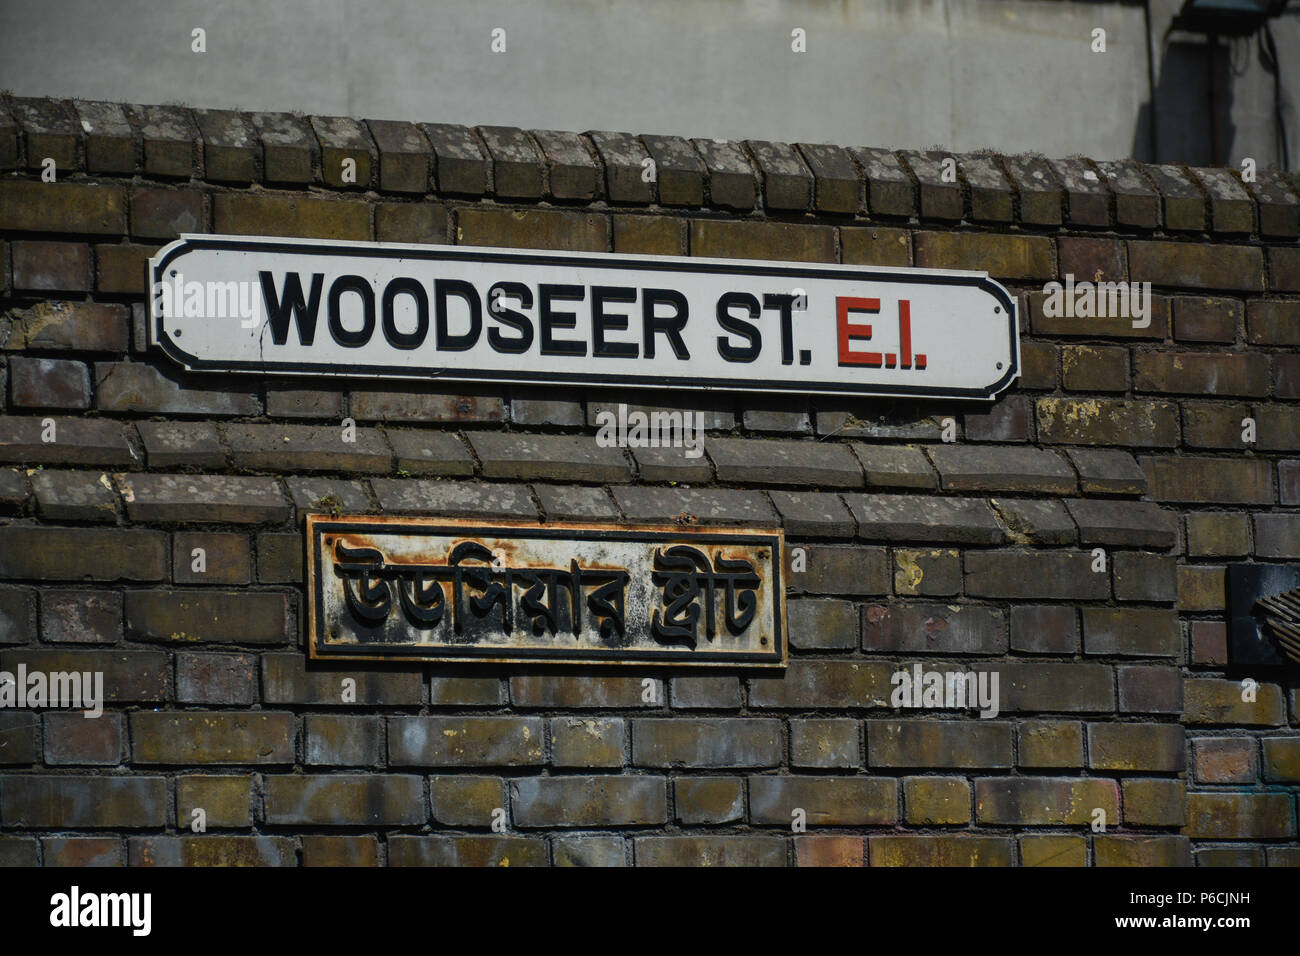 Street sign in London, England Stock Photo